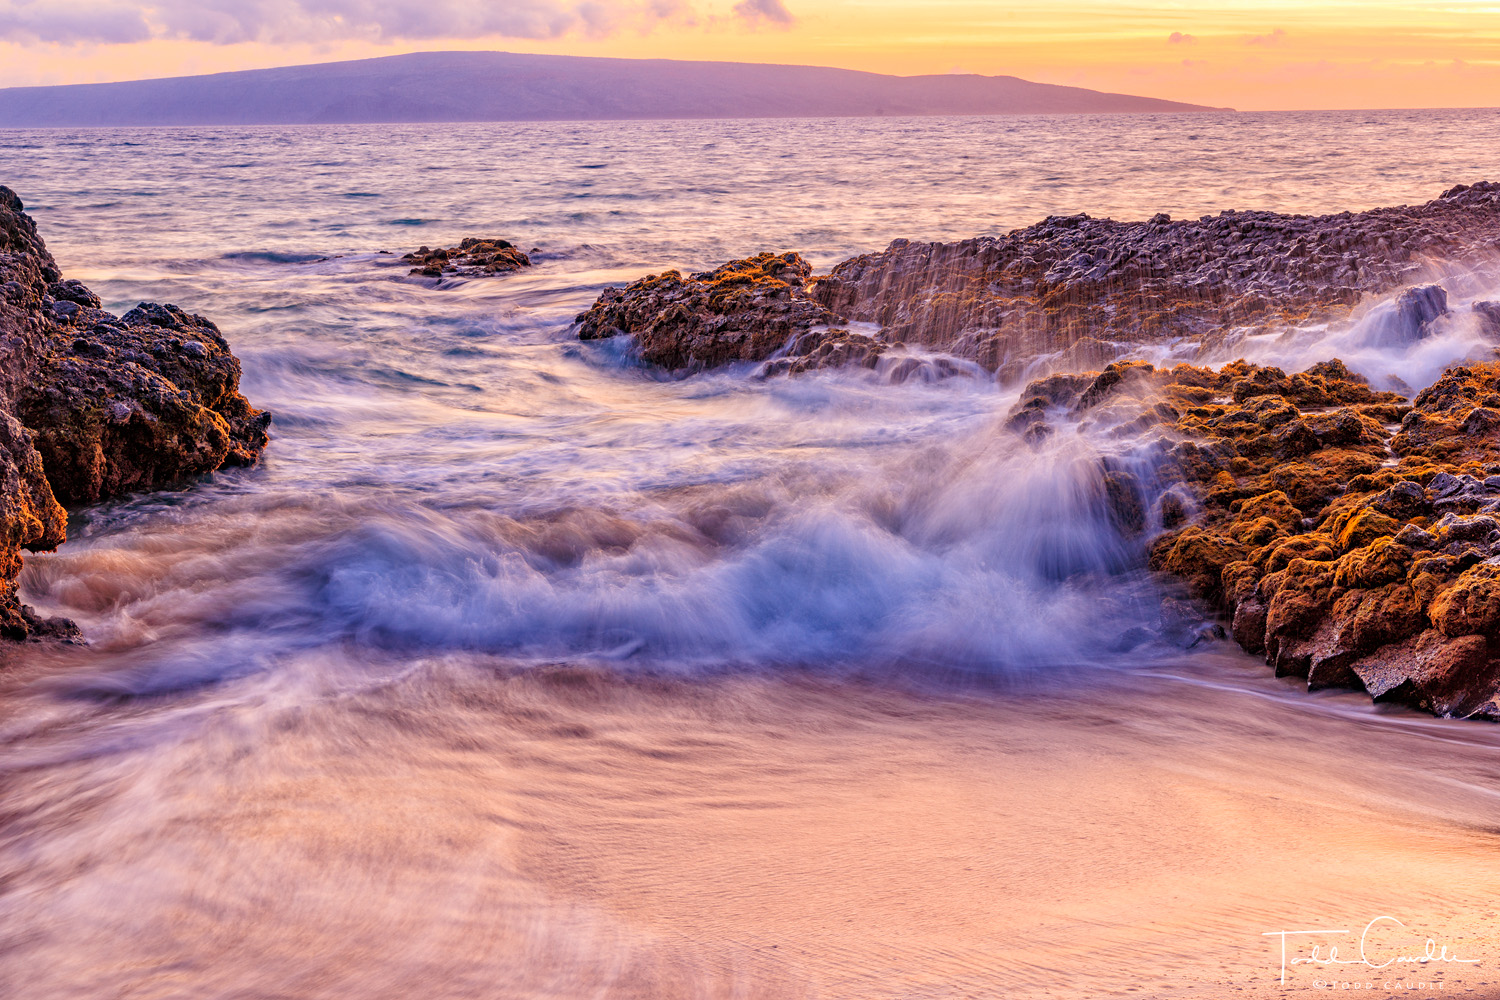 This special cove on the western shores of Maui, with its mix of soft sand and rocky outcroppings, provides a distant view of...